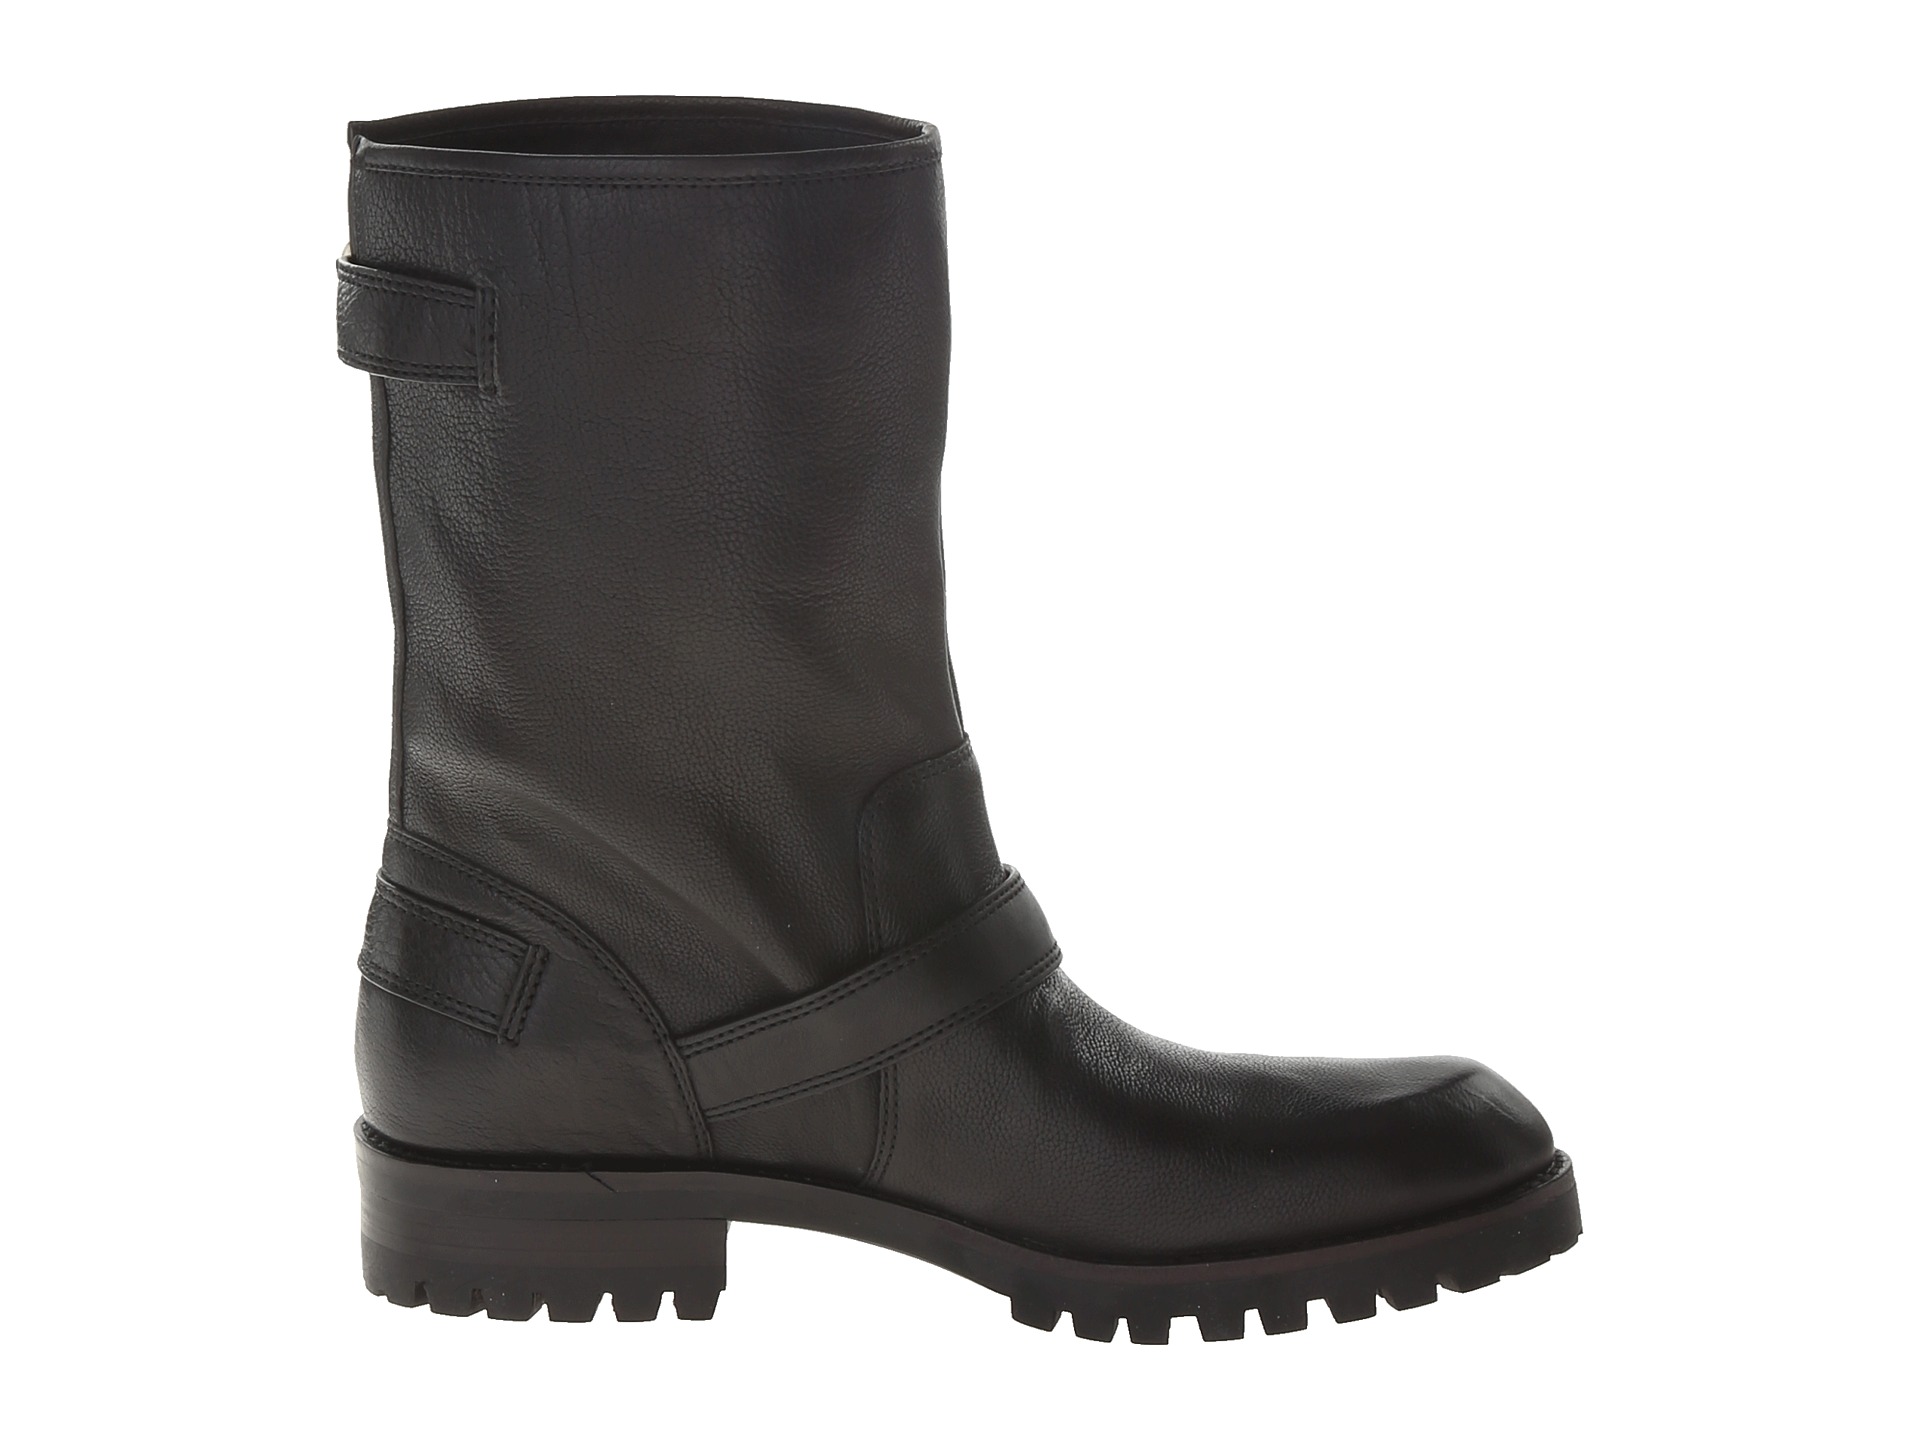 Pierre Balmain Leather Moto Boot With Buckles Black - Zappos.com Free ...